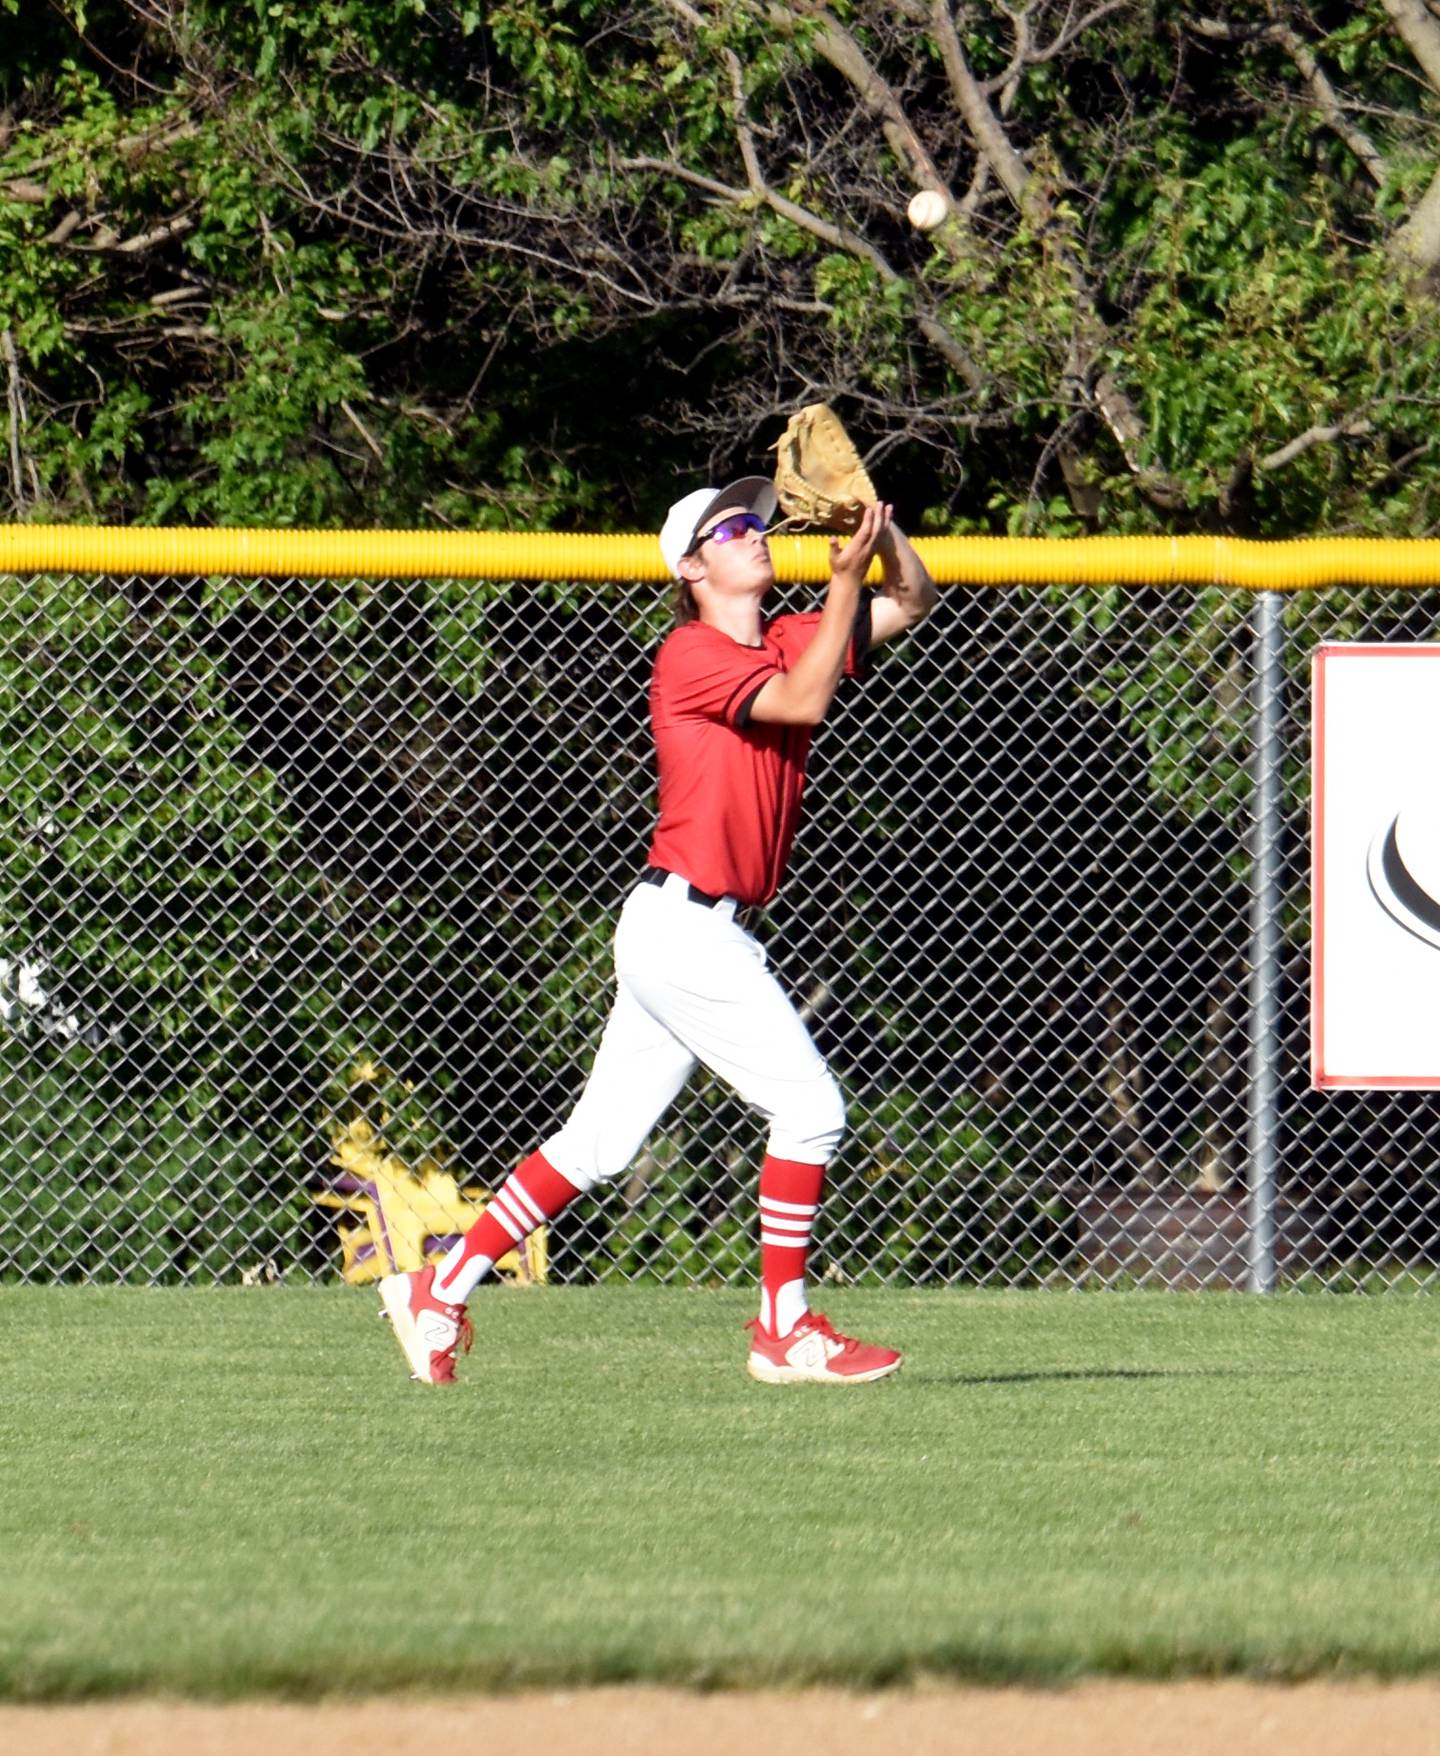 Senior centerfielder McCoy Haines catches a deep ball during the first game to end an inning